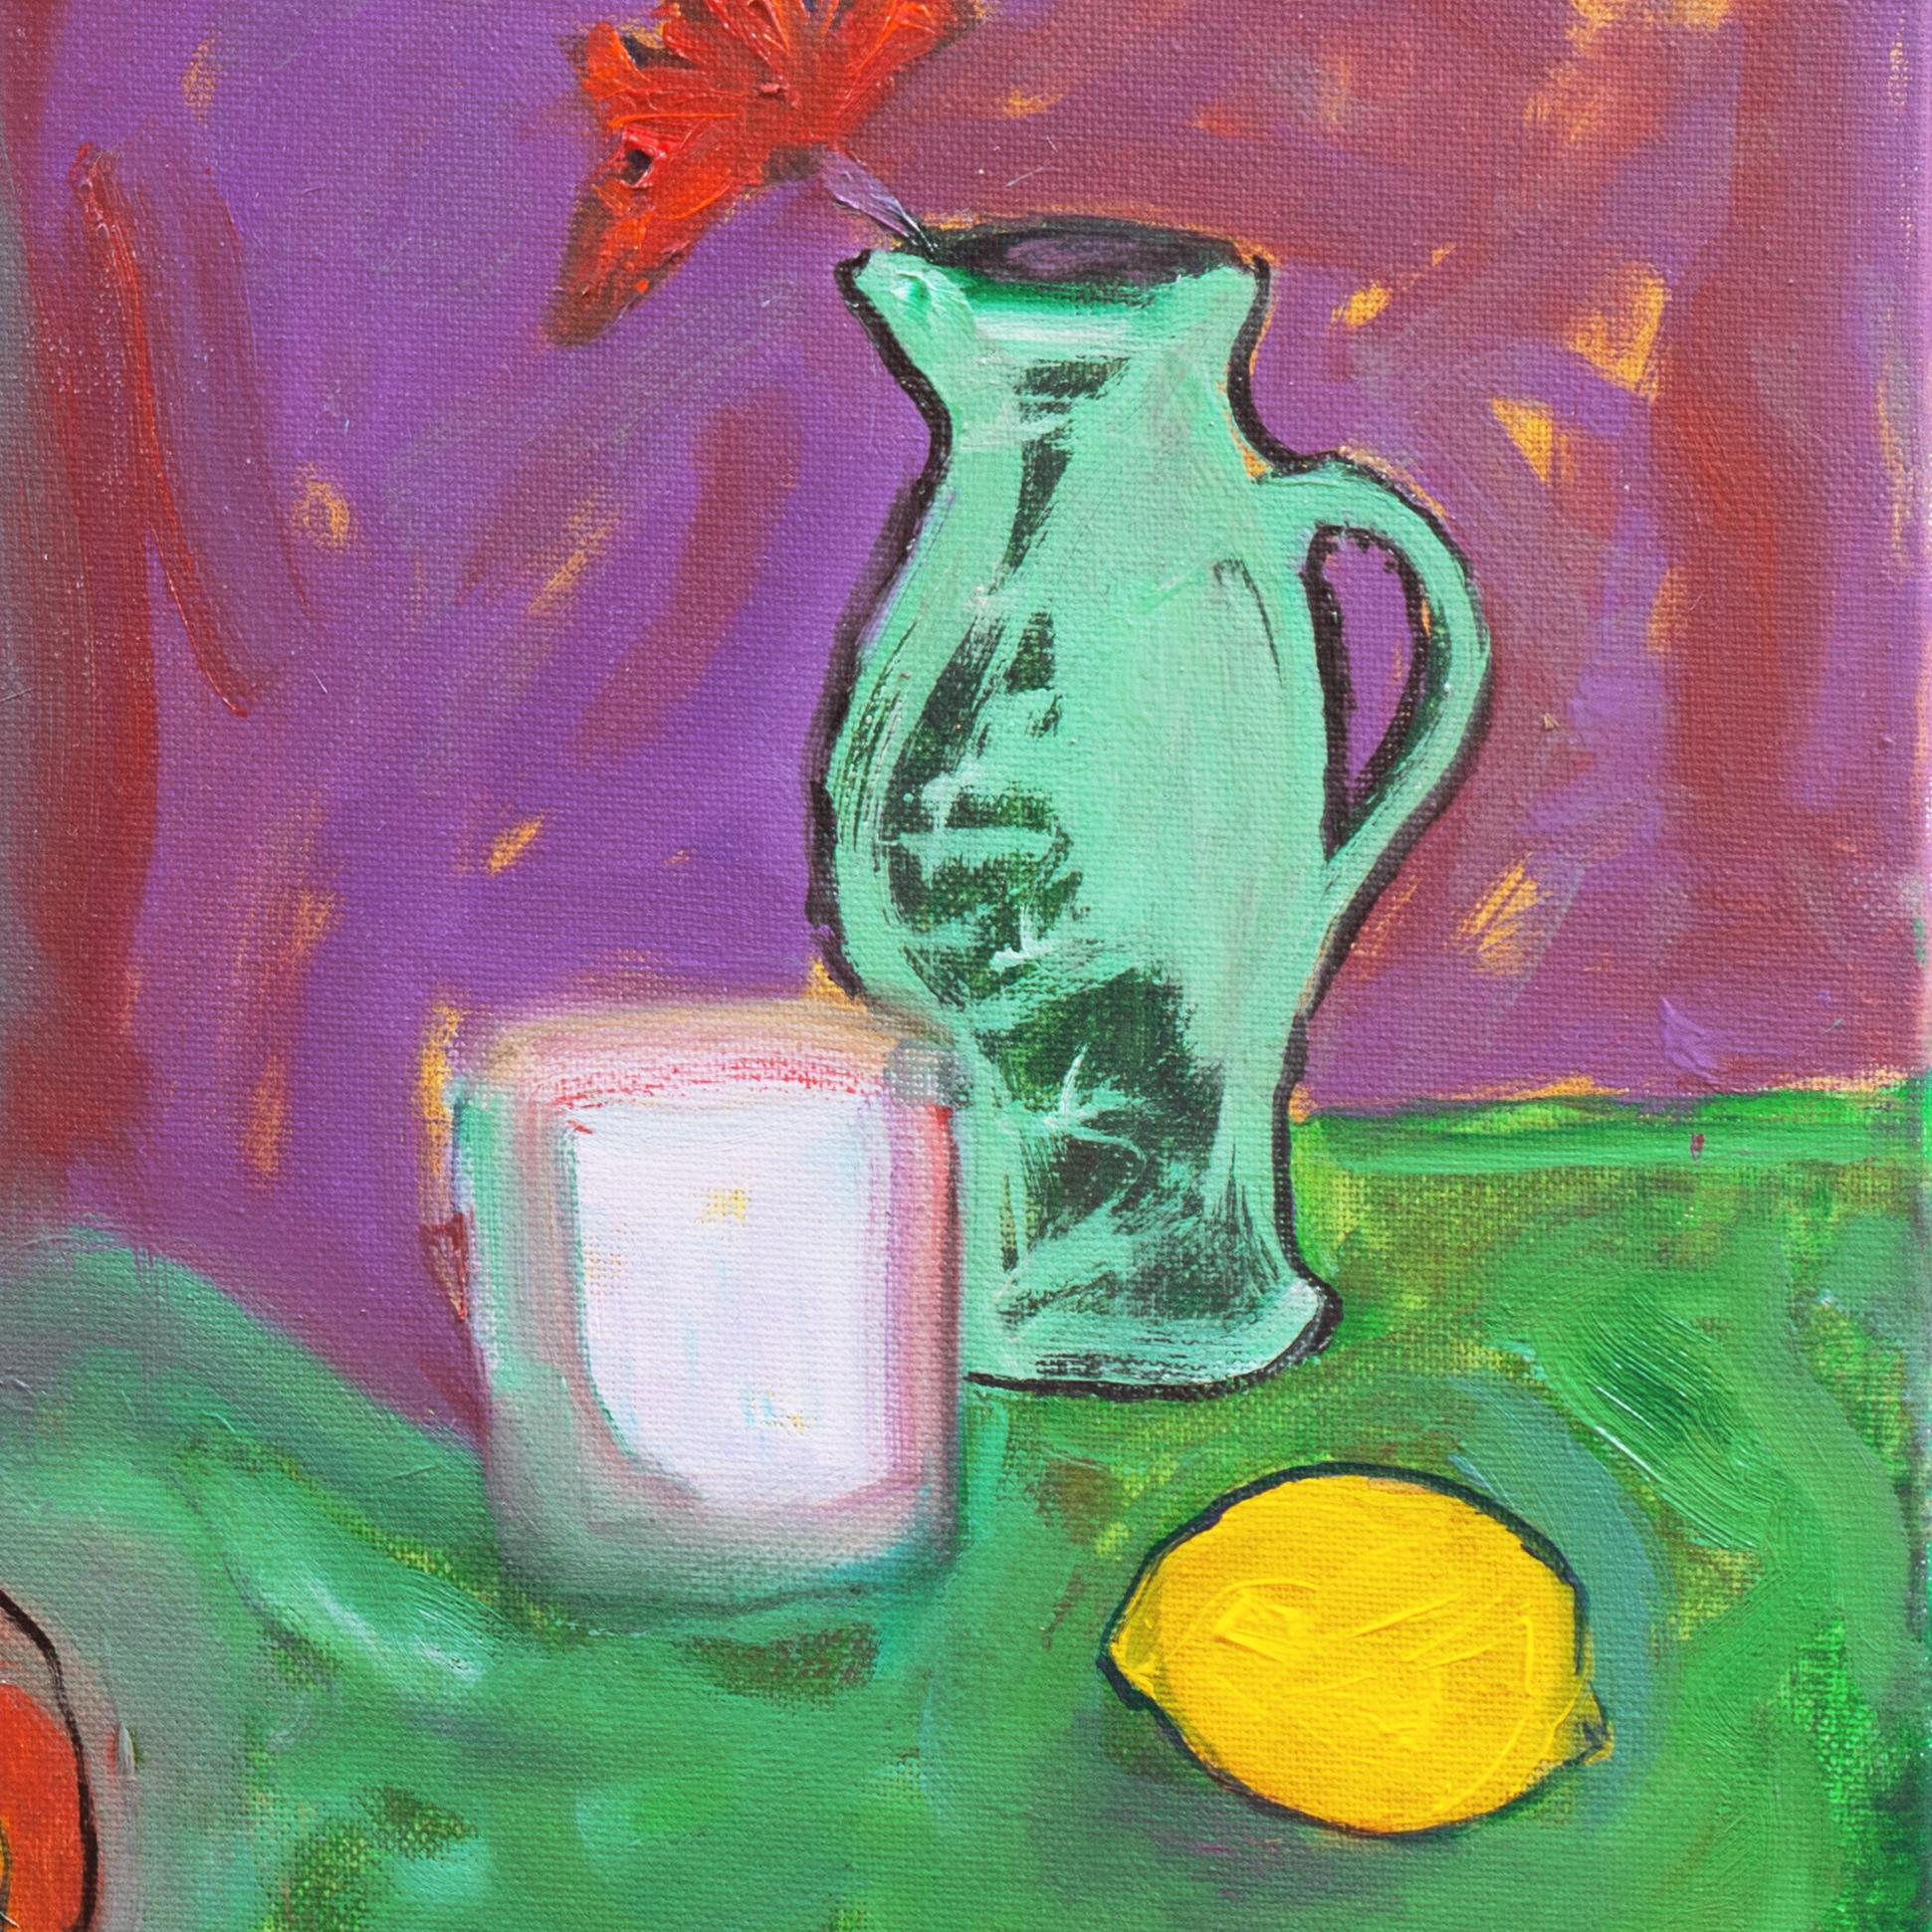 Initialed lower right, 'A.E.M.' for Anthony McNaught (American, born 1952); additionally signed verso, 'Anthony McNaught', titled 'Still Life with Green Jug', and dated 2019.

This California Post-Impressionist artist studied at the Esalen Institute